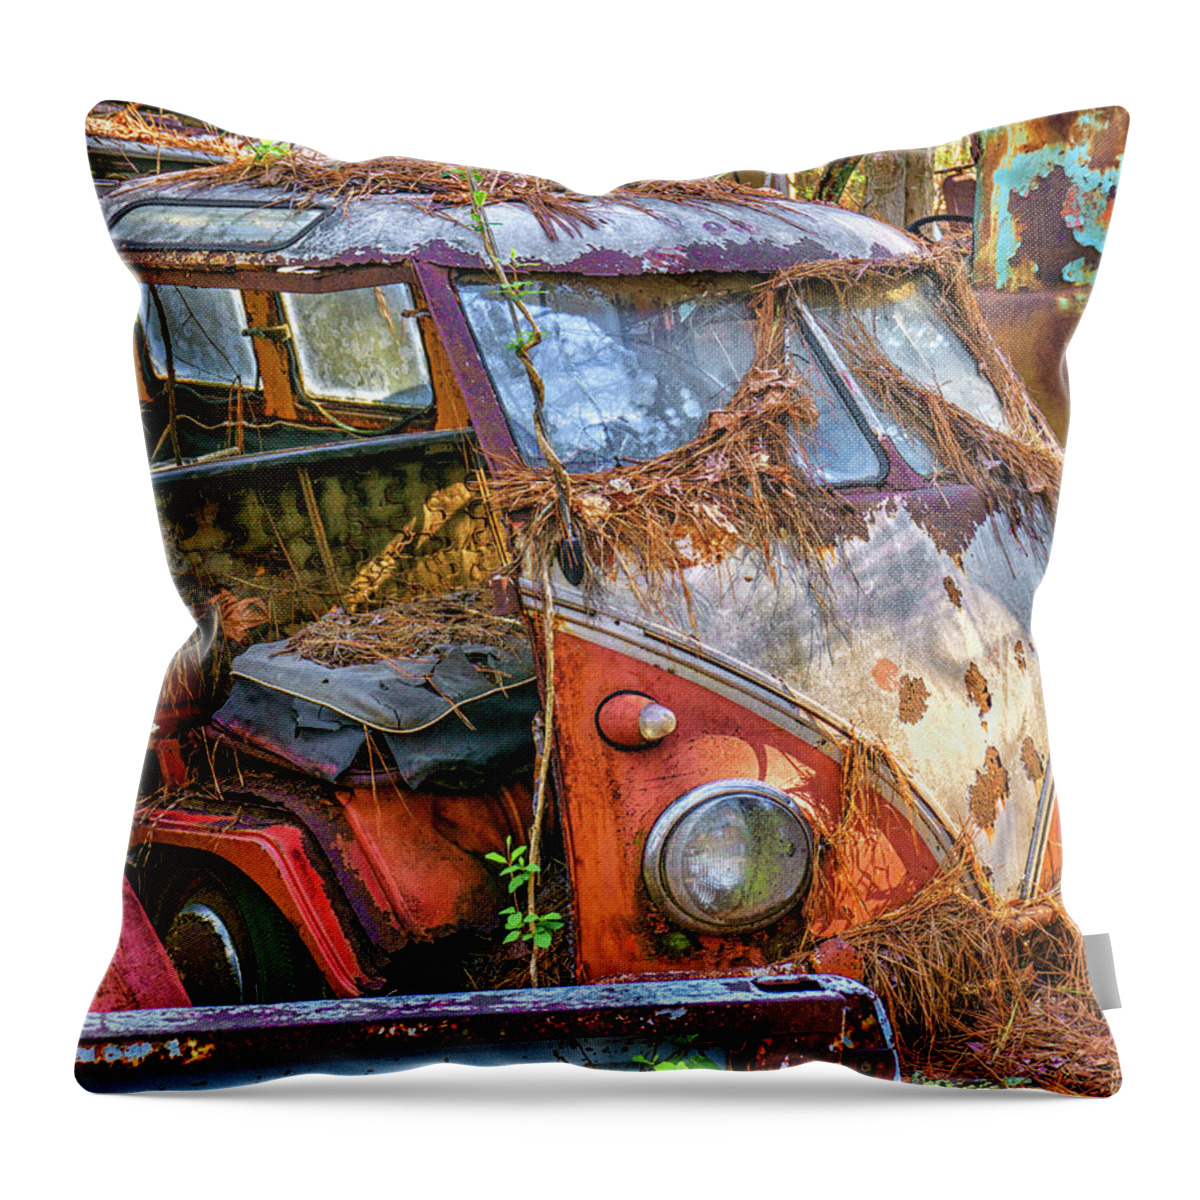 V W Throw Pillow featuring the photograph V W Van by Dennis Dugan